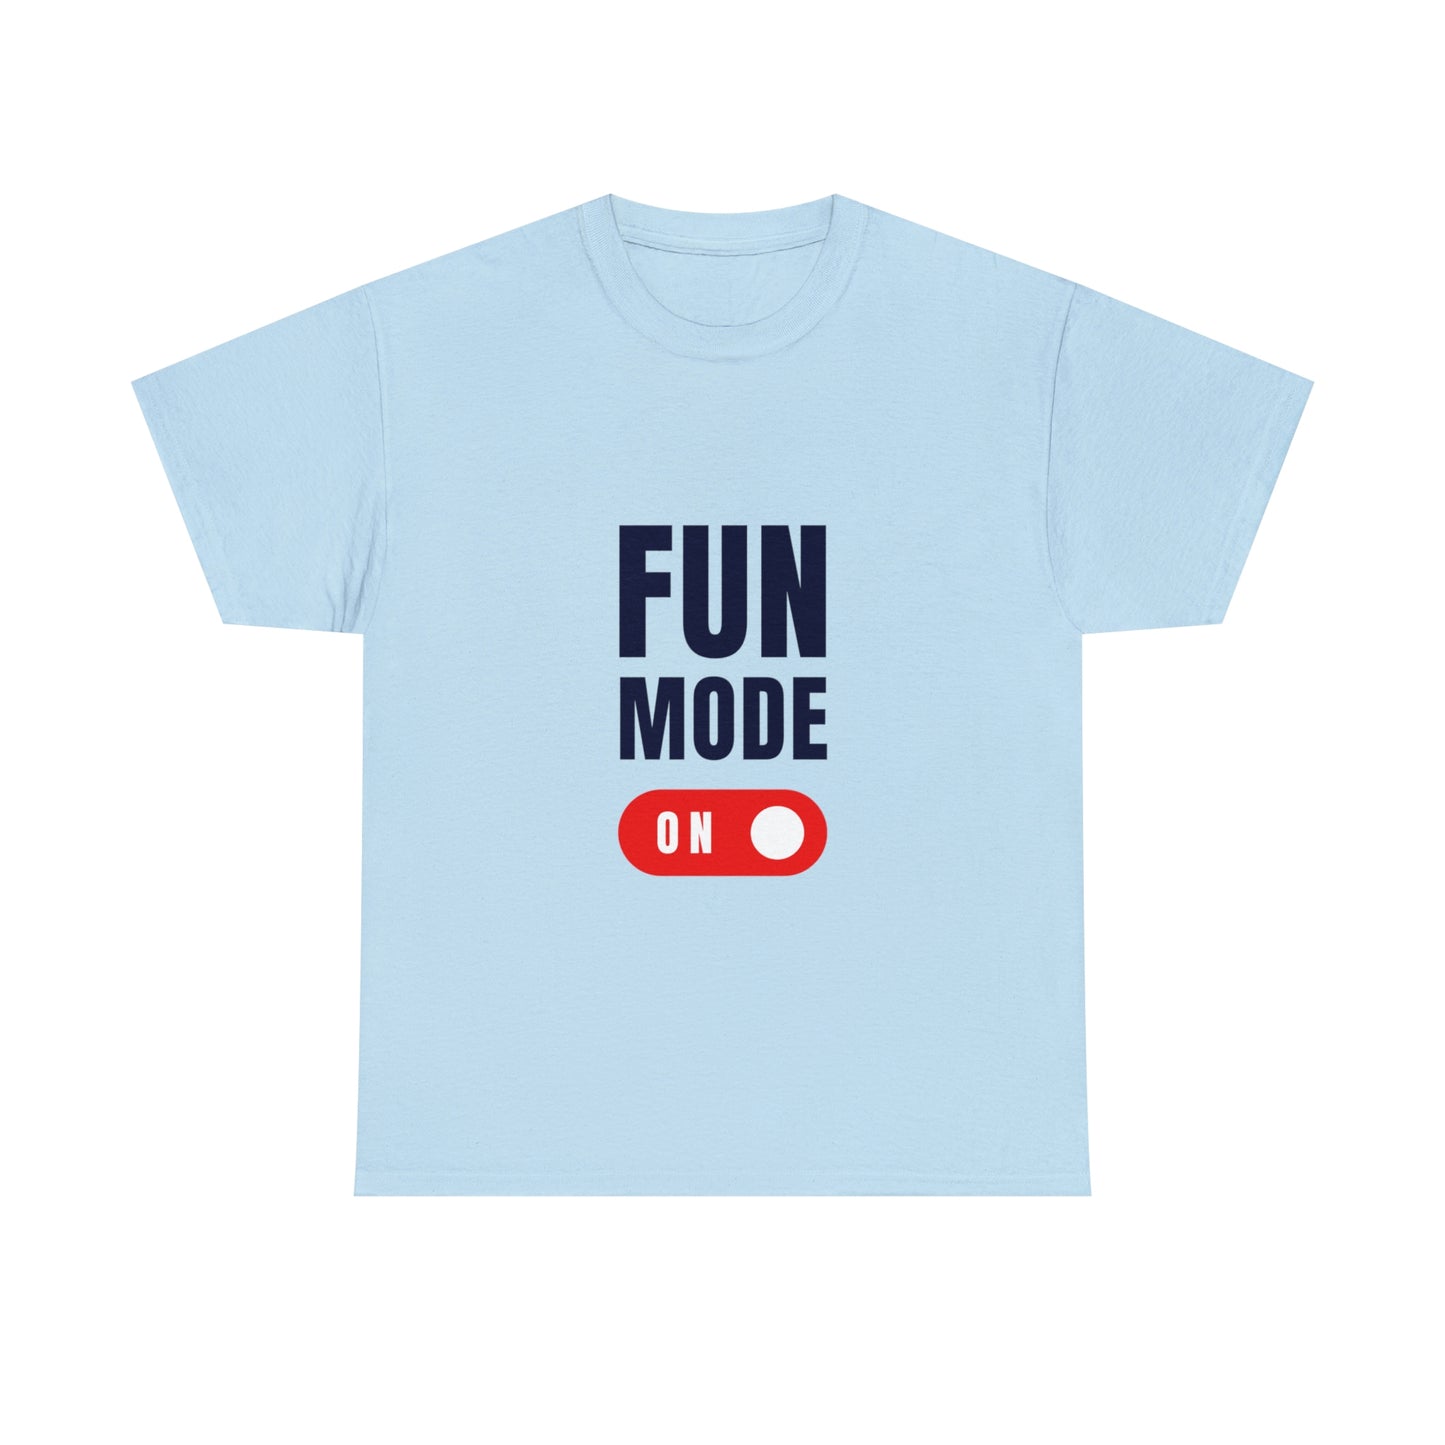 Fun mode  Your Style with Our Custom Printed Tee Unique Design Comfortable Fit and Personalized for You.  color, funny tshirt tee shirt